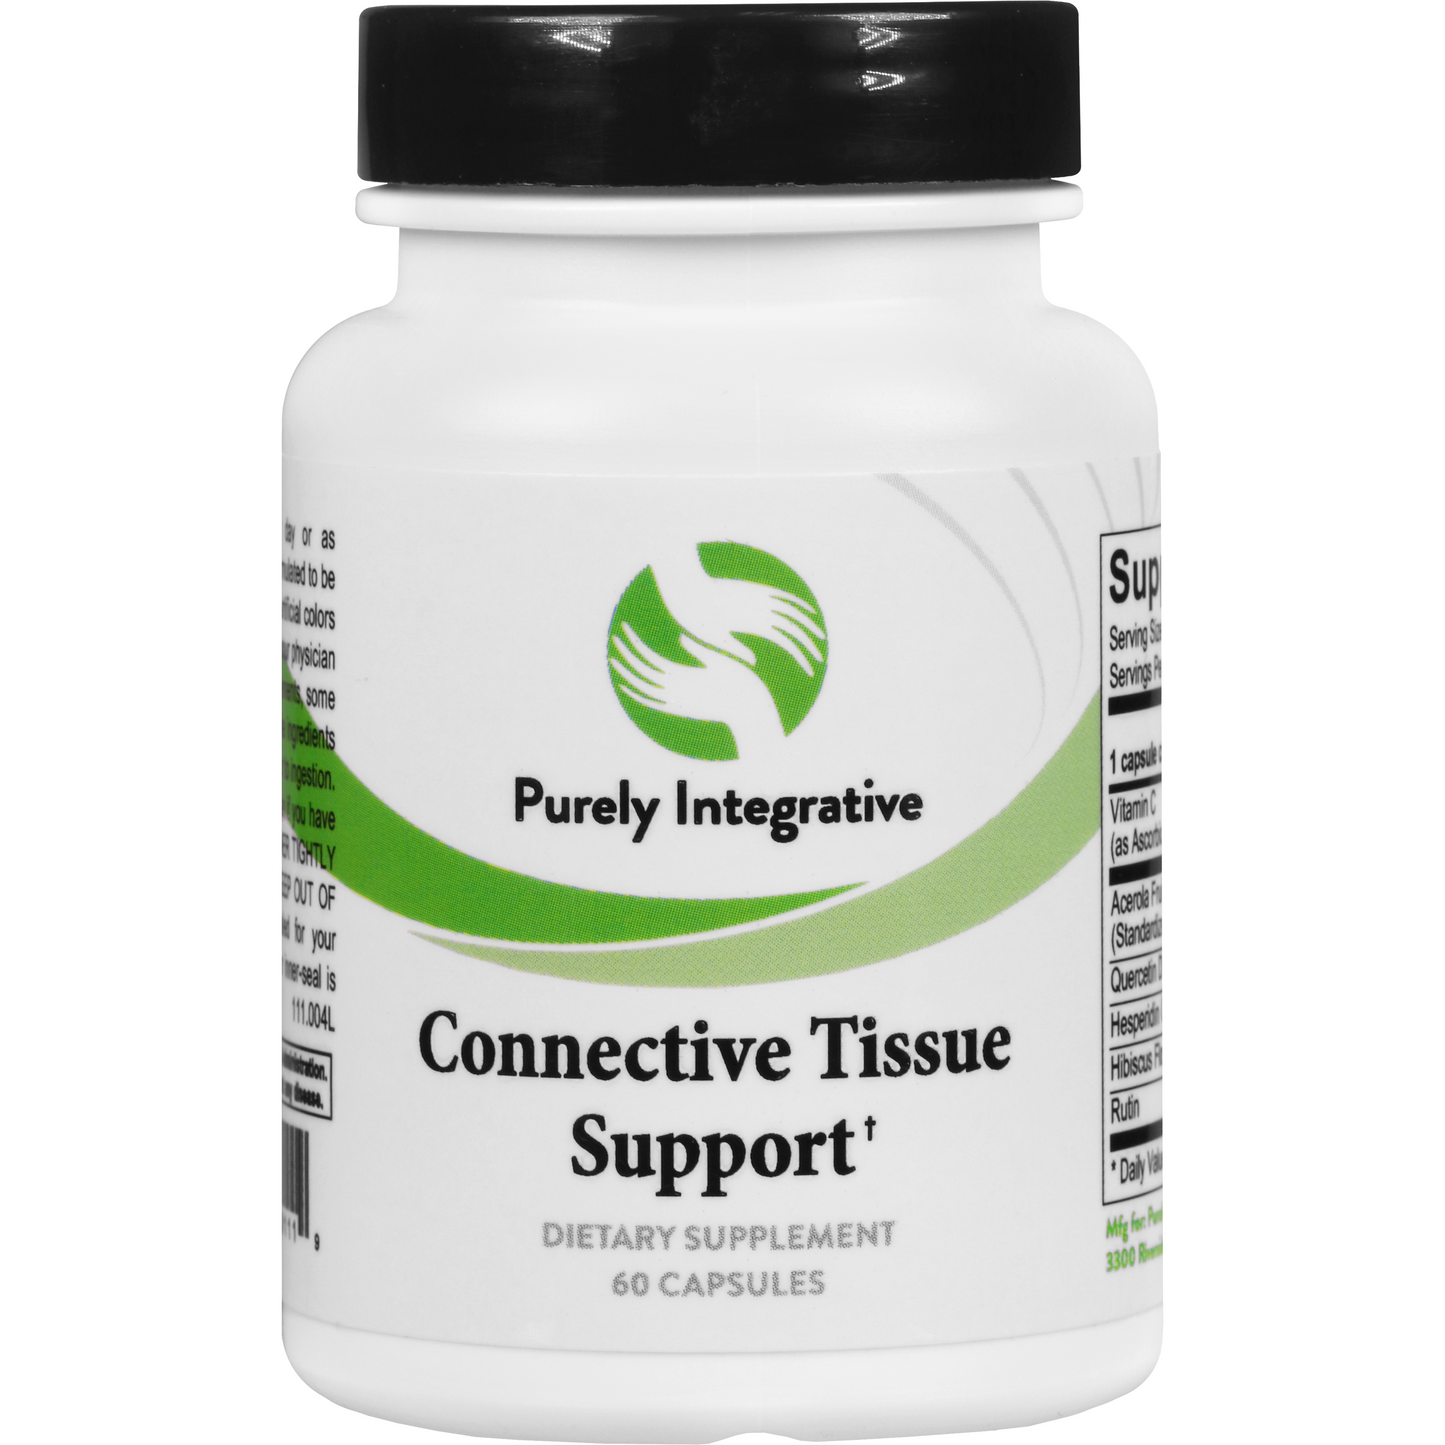 Connective Tissue Support